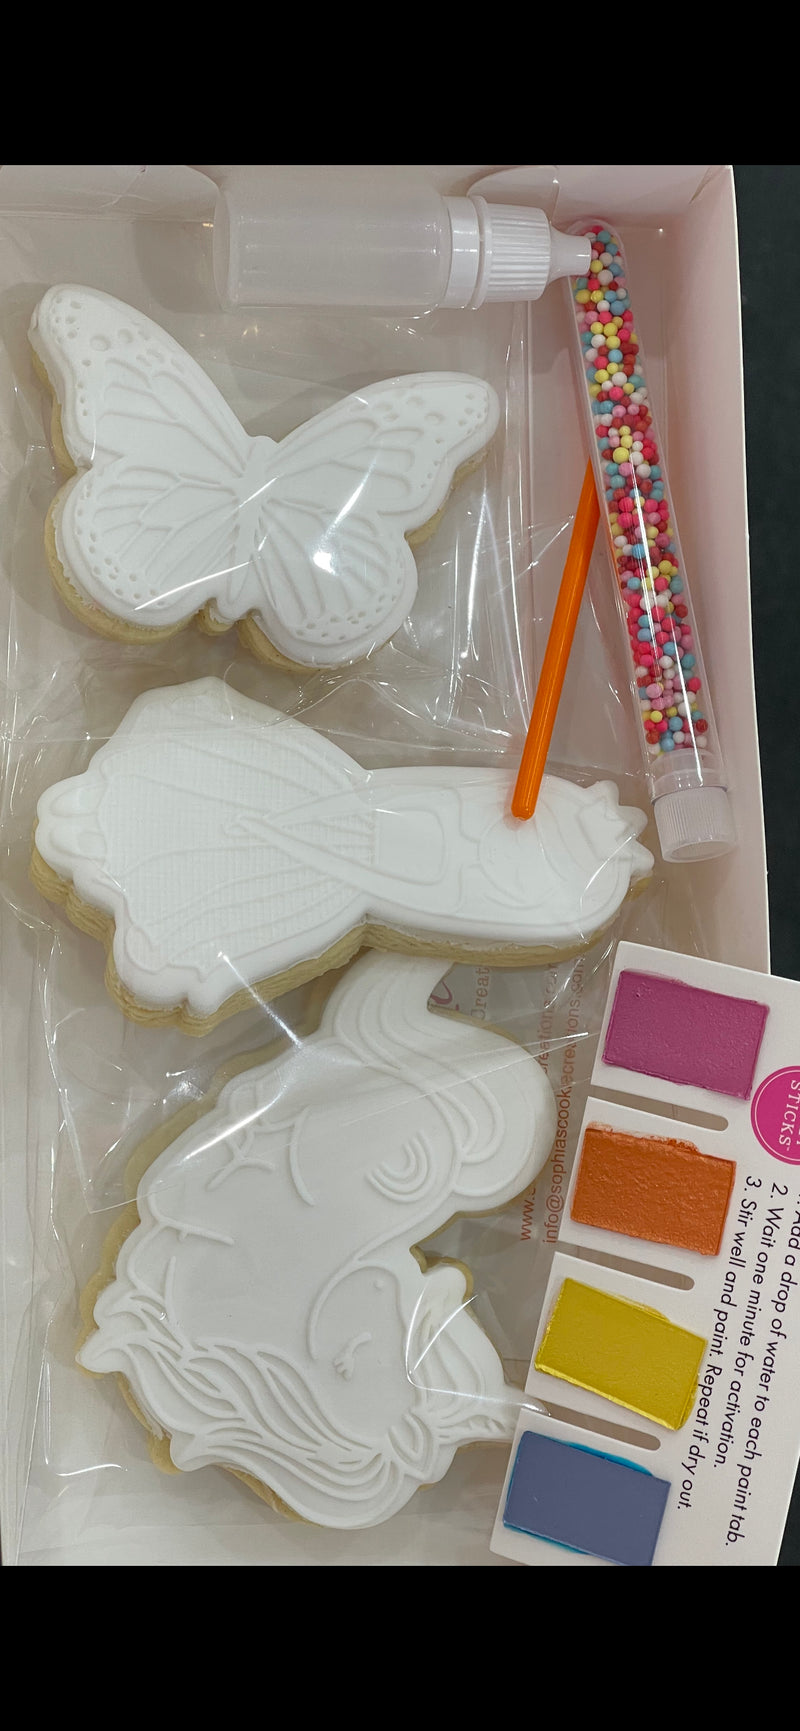 Paint Your Own Cookies (PYO) with Butterfly, Princess and Unicorn set